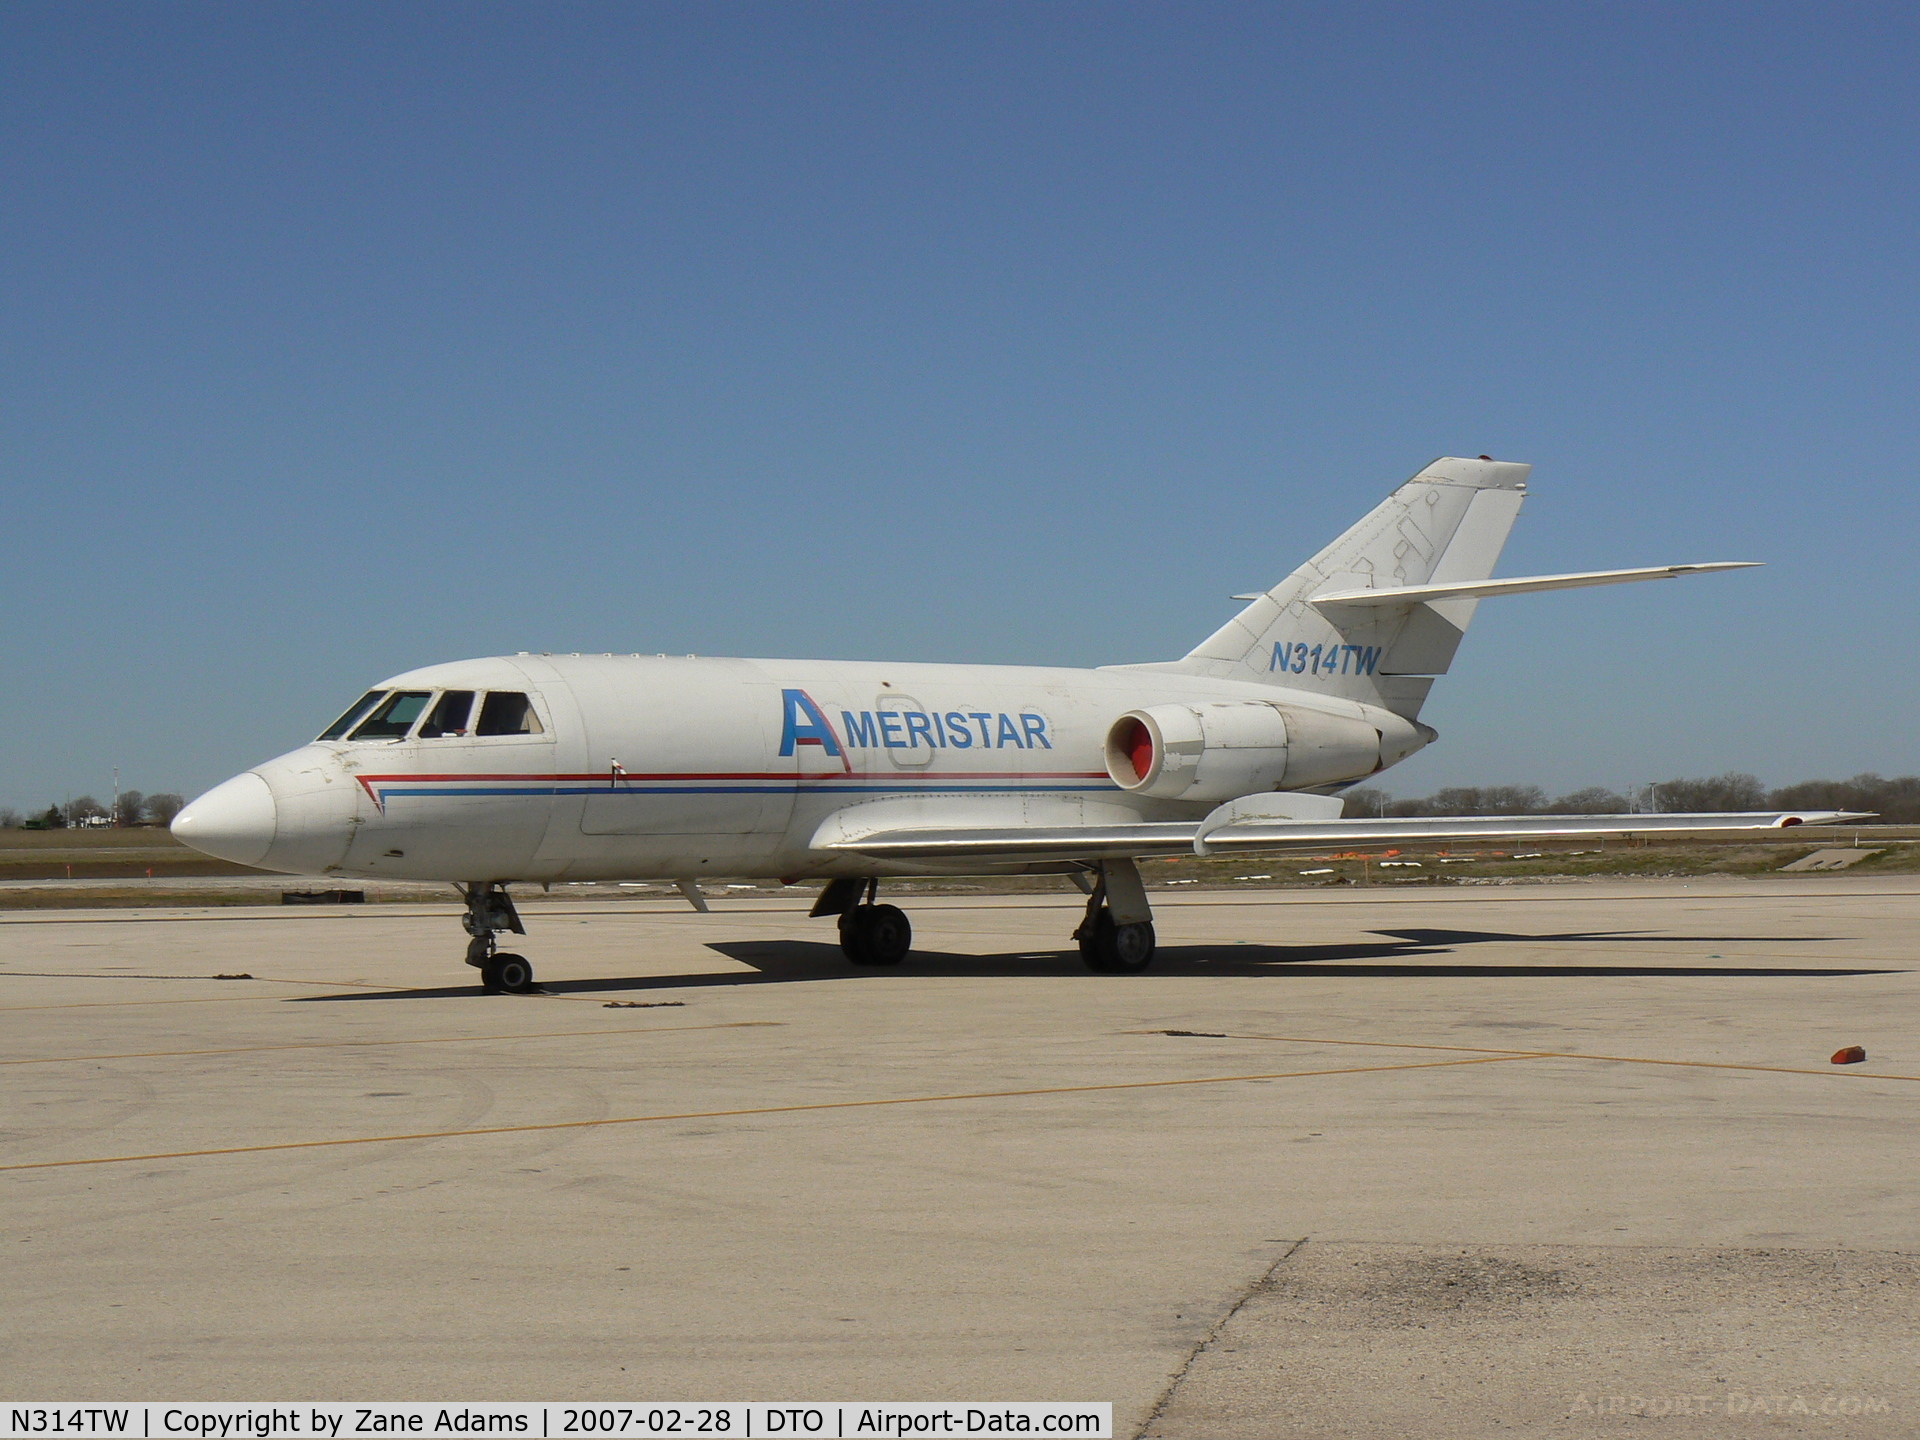 N314TW, 1974 Dassault Falcon (Mystere) 20E C/N 314, Freighter 